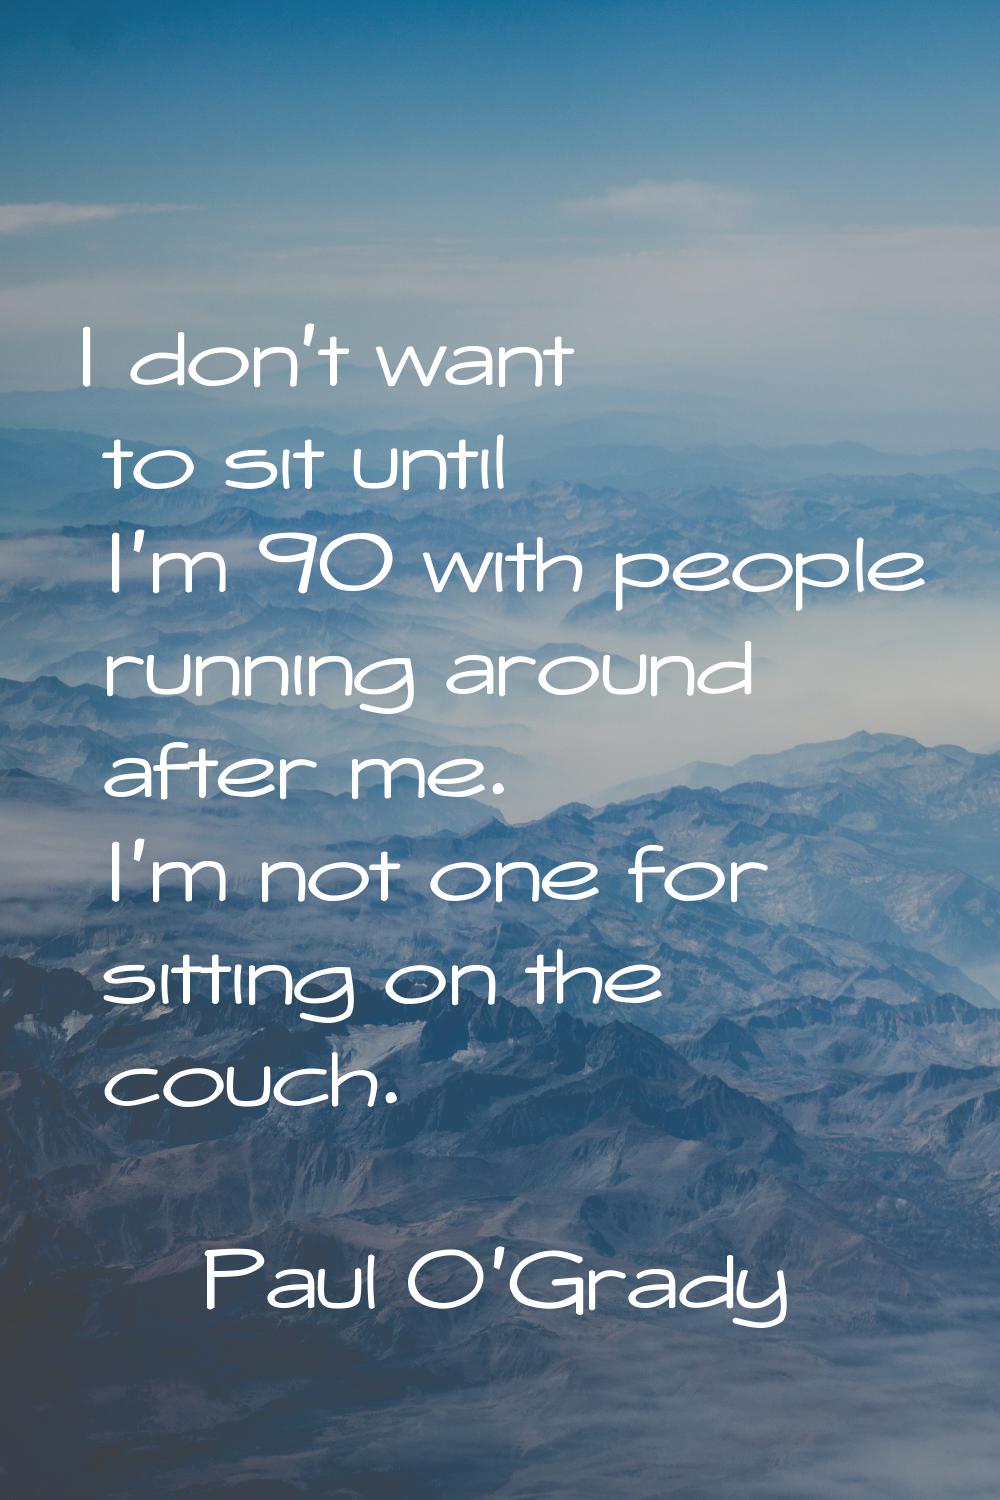 I don't want to sit until I'm 90 with people running around after me. I'm not one for sitting on th